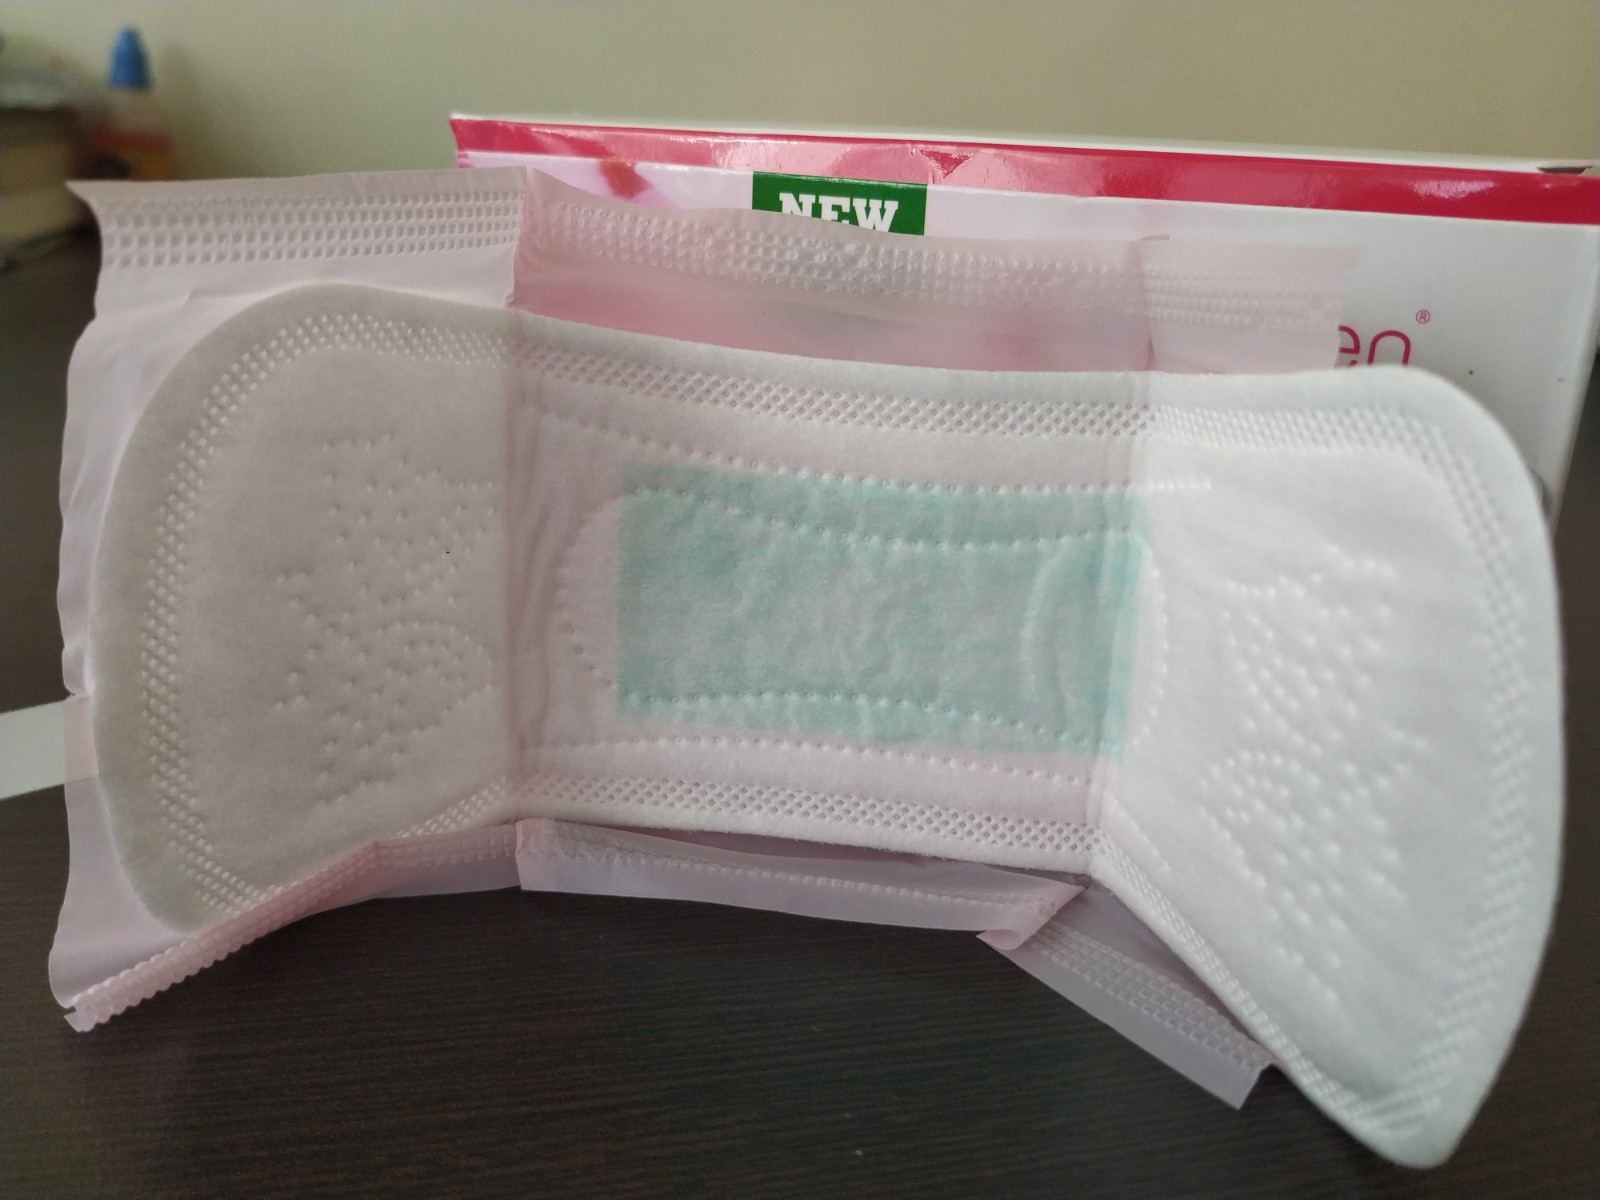 Everteen Daily Panty Liners Review